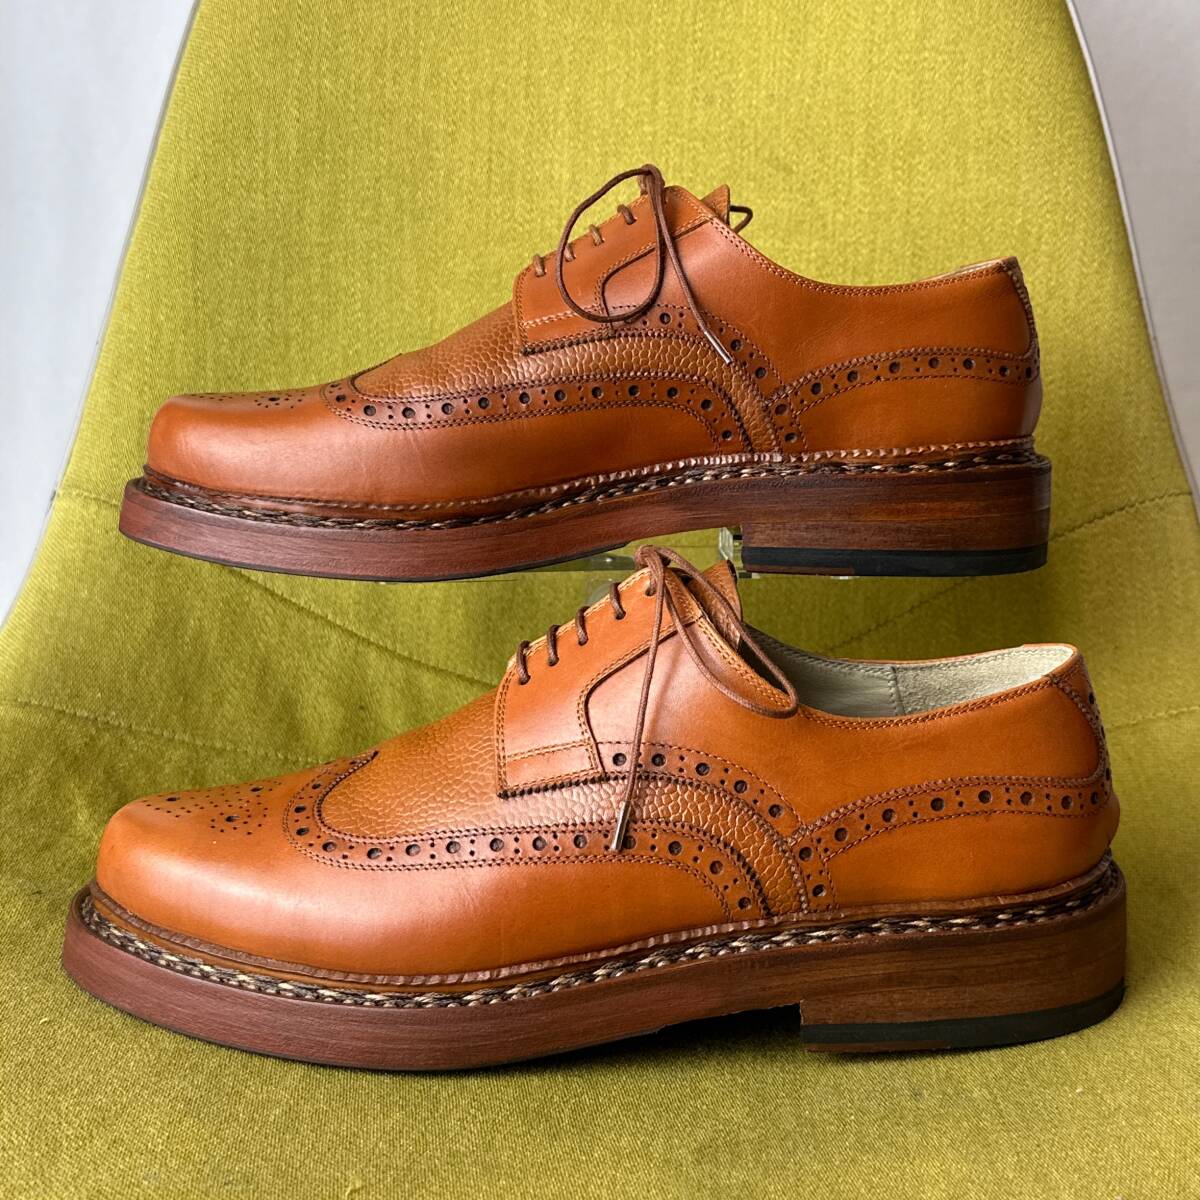  beautiful goods Buday shoesb large shoes tsopna-to made law Wing chip combination leather shoes 7 Hungary made 25.5 corresponding Triple sole 